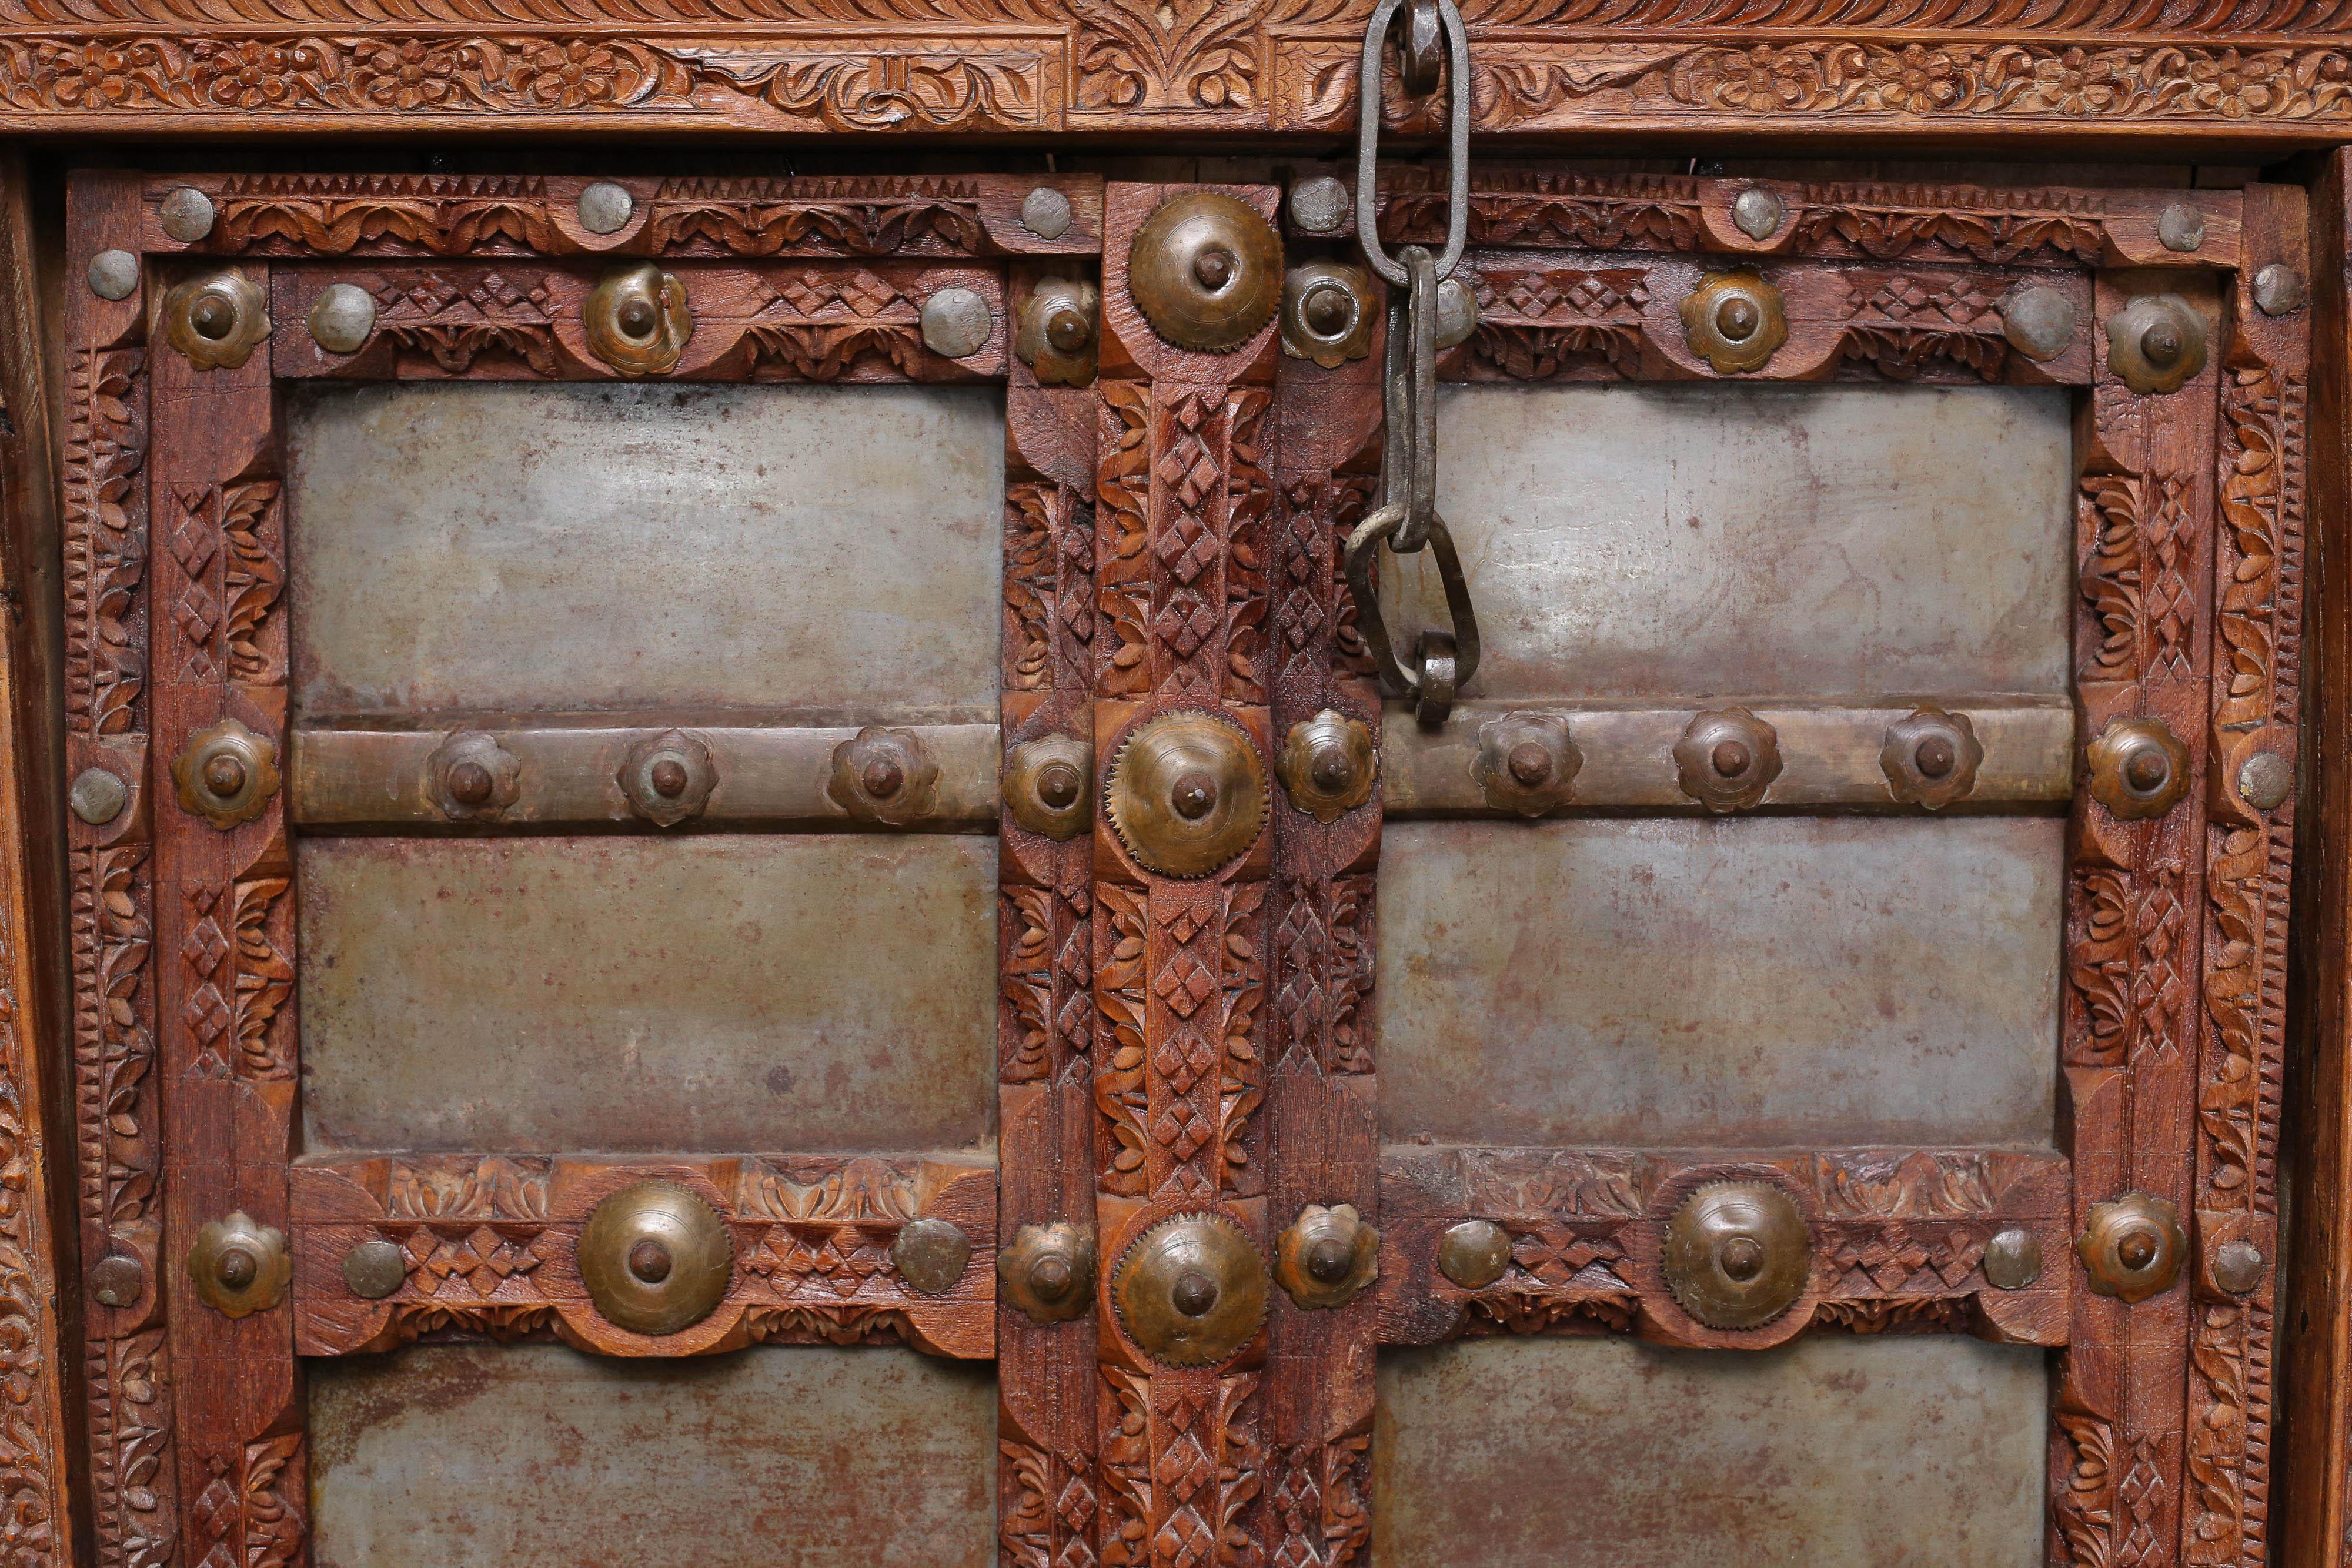 An extremely rare 200 years old highly ornamental teak wood door from a farm house in Western India. The door is heavily reinforced with metal sheets and hand-forged iron studs. The doors revolve around one peg on the top and one in the bottom. Old